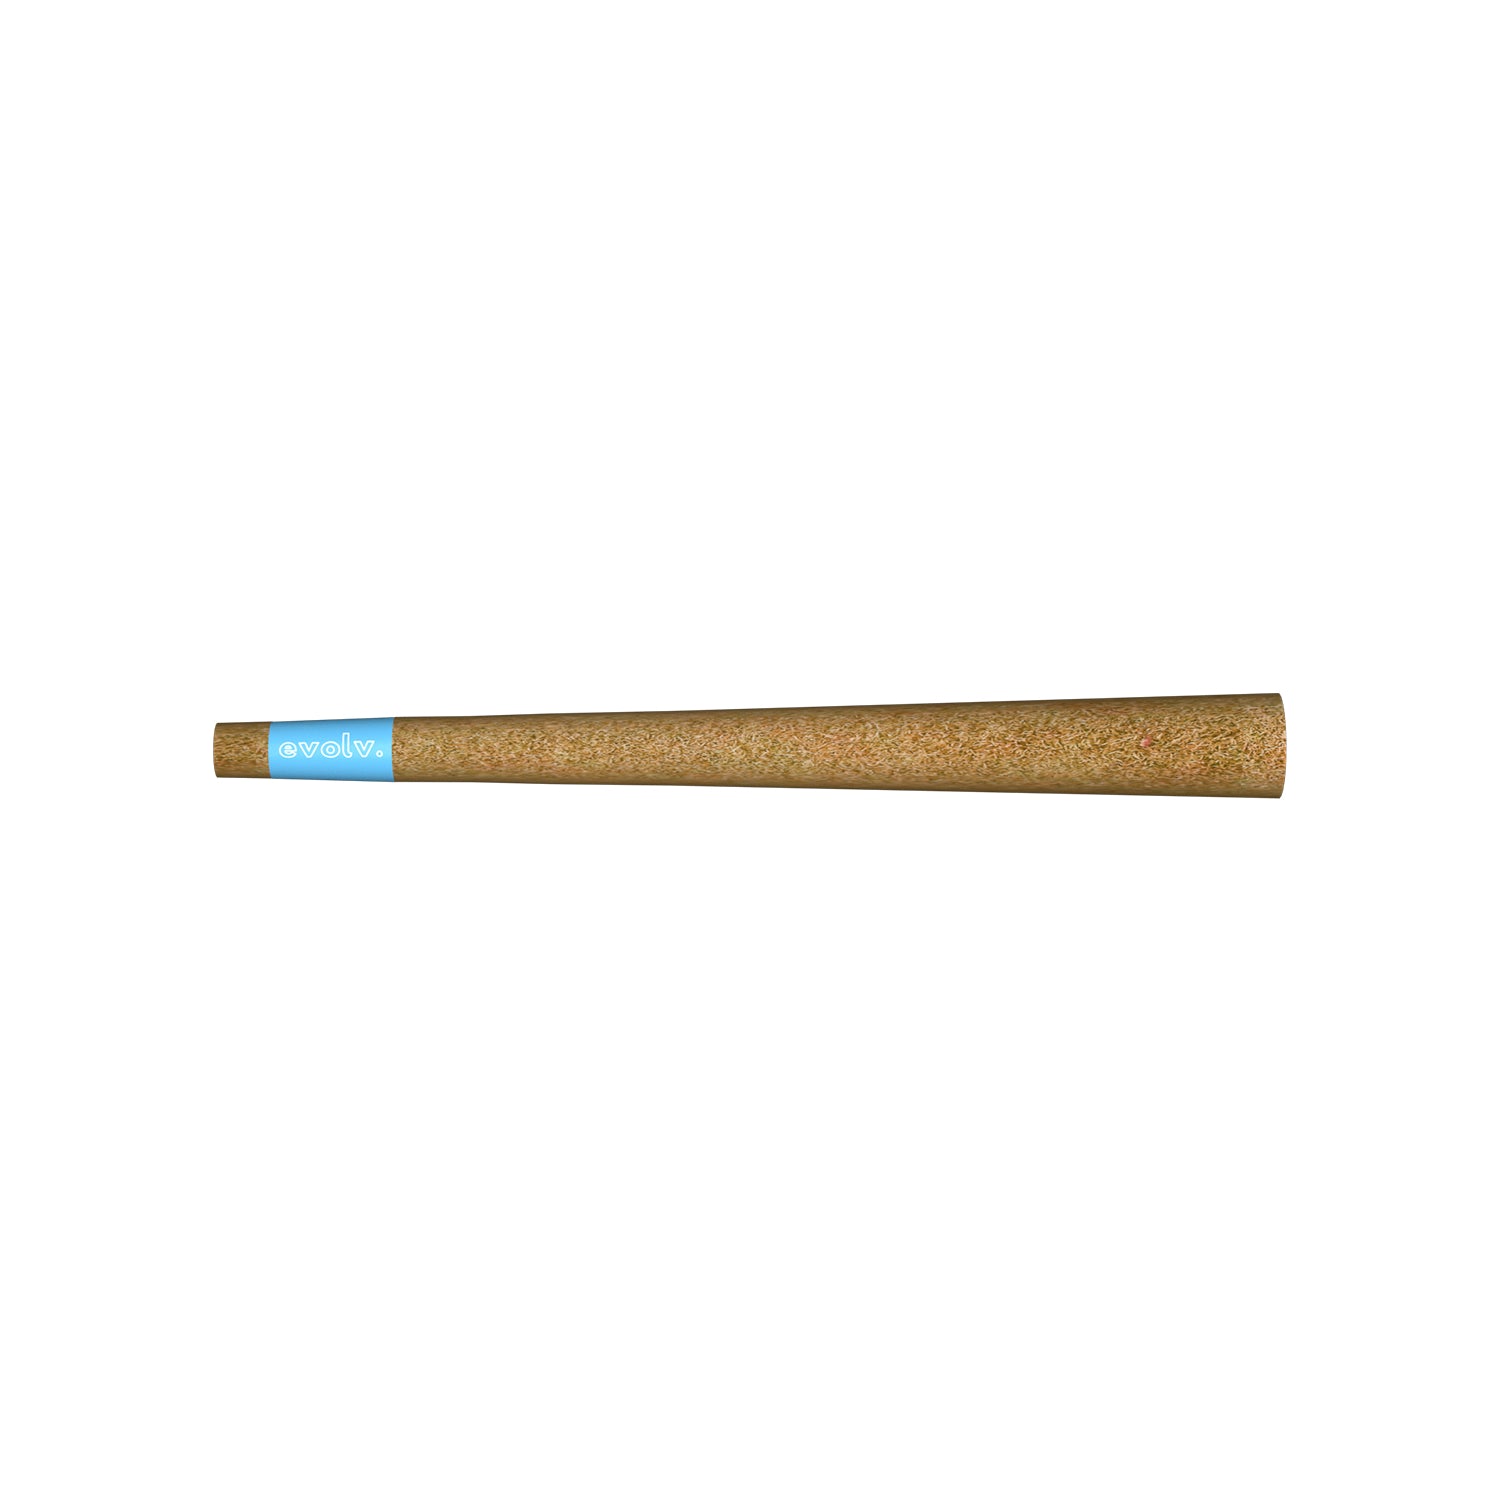 Evolv Pre-Rolled Blunt Cones | 1 1/4 Size: 84mm/ 26mm | 32/Pack